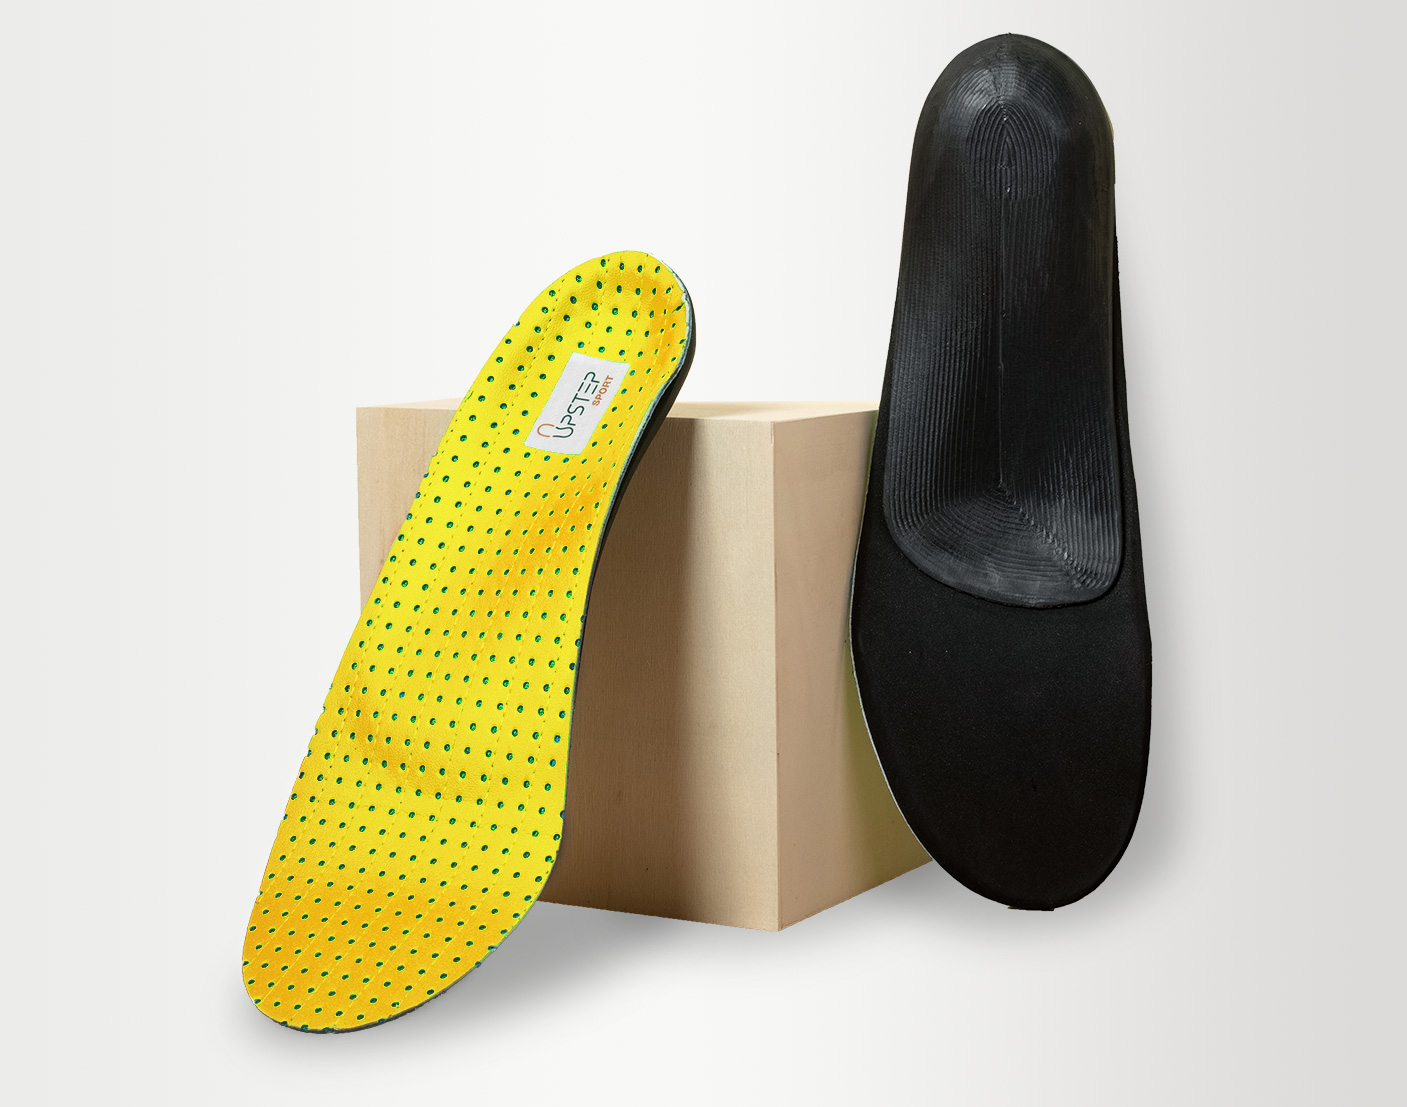 Upstep On My Feet All Day custom insoles for standing and walking on concrete all day.